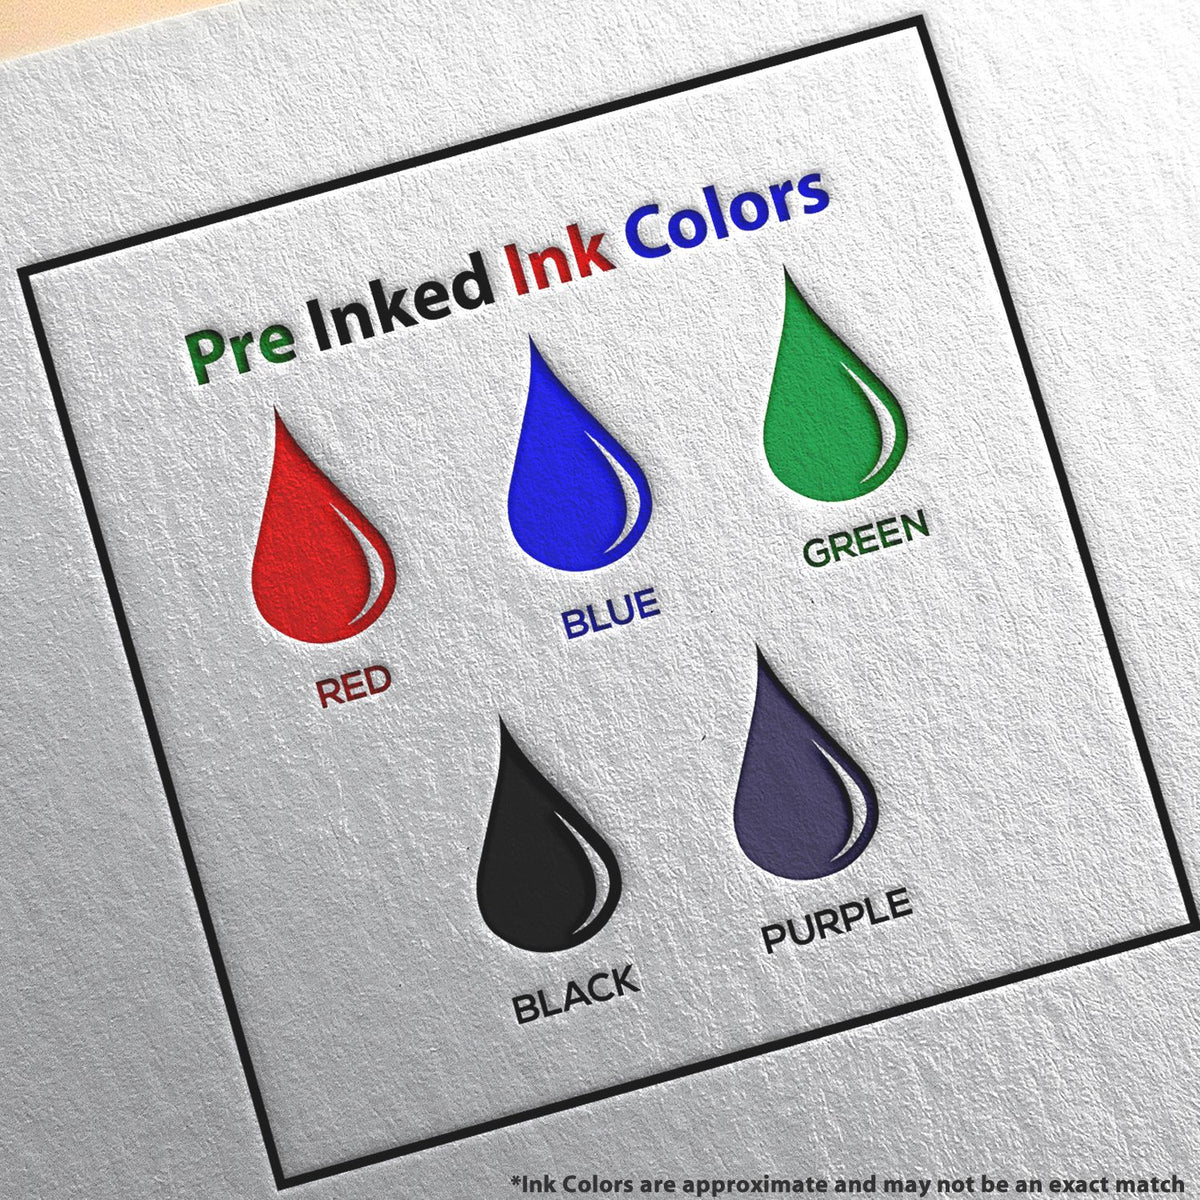 A picture showing the different ink colors or hues available for the Super Slim Nevada Notary Public Stamp product.